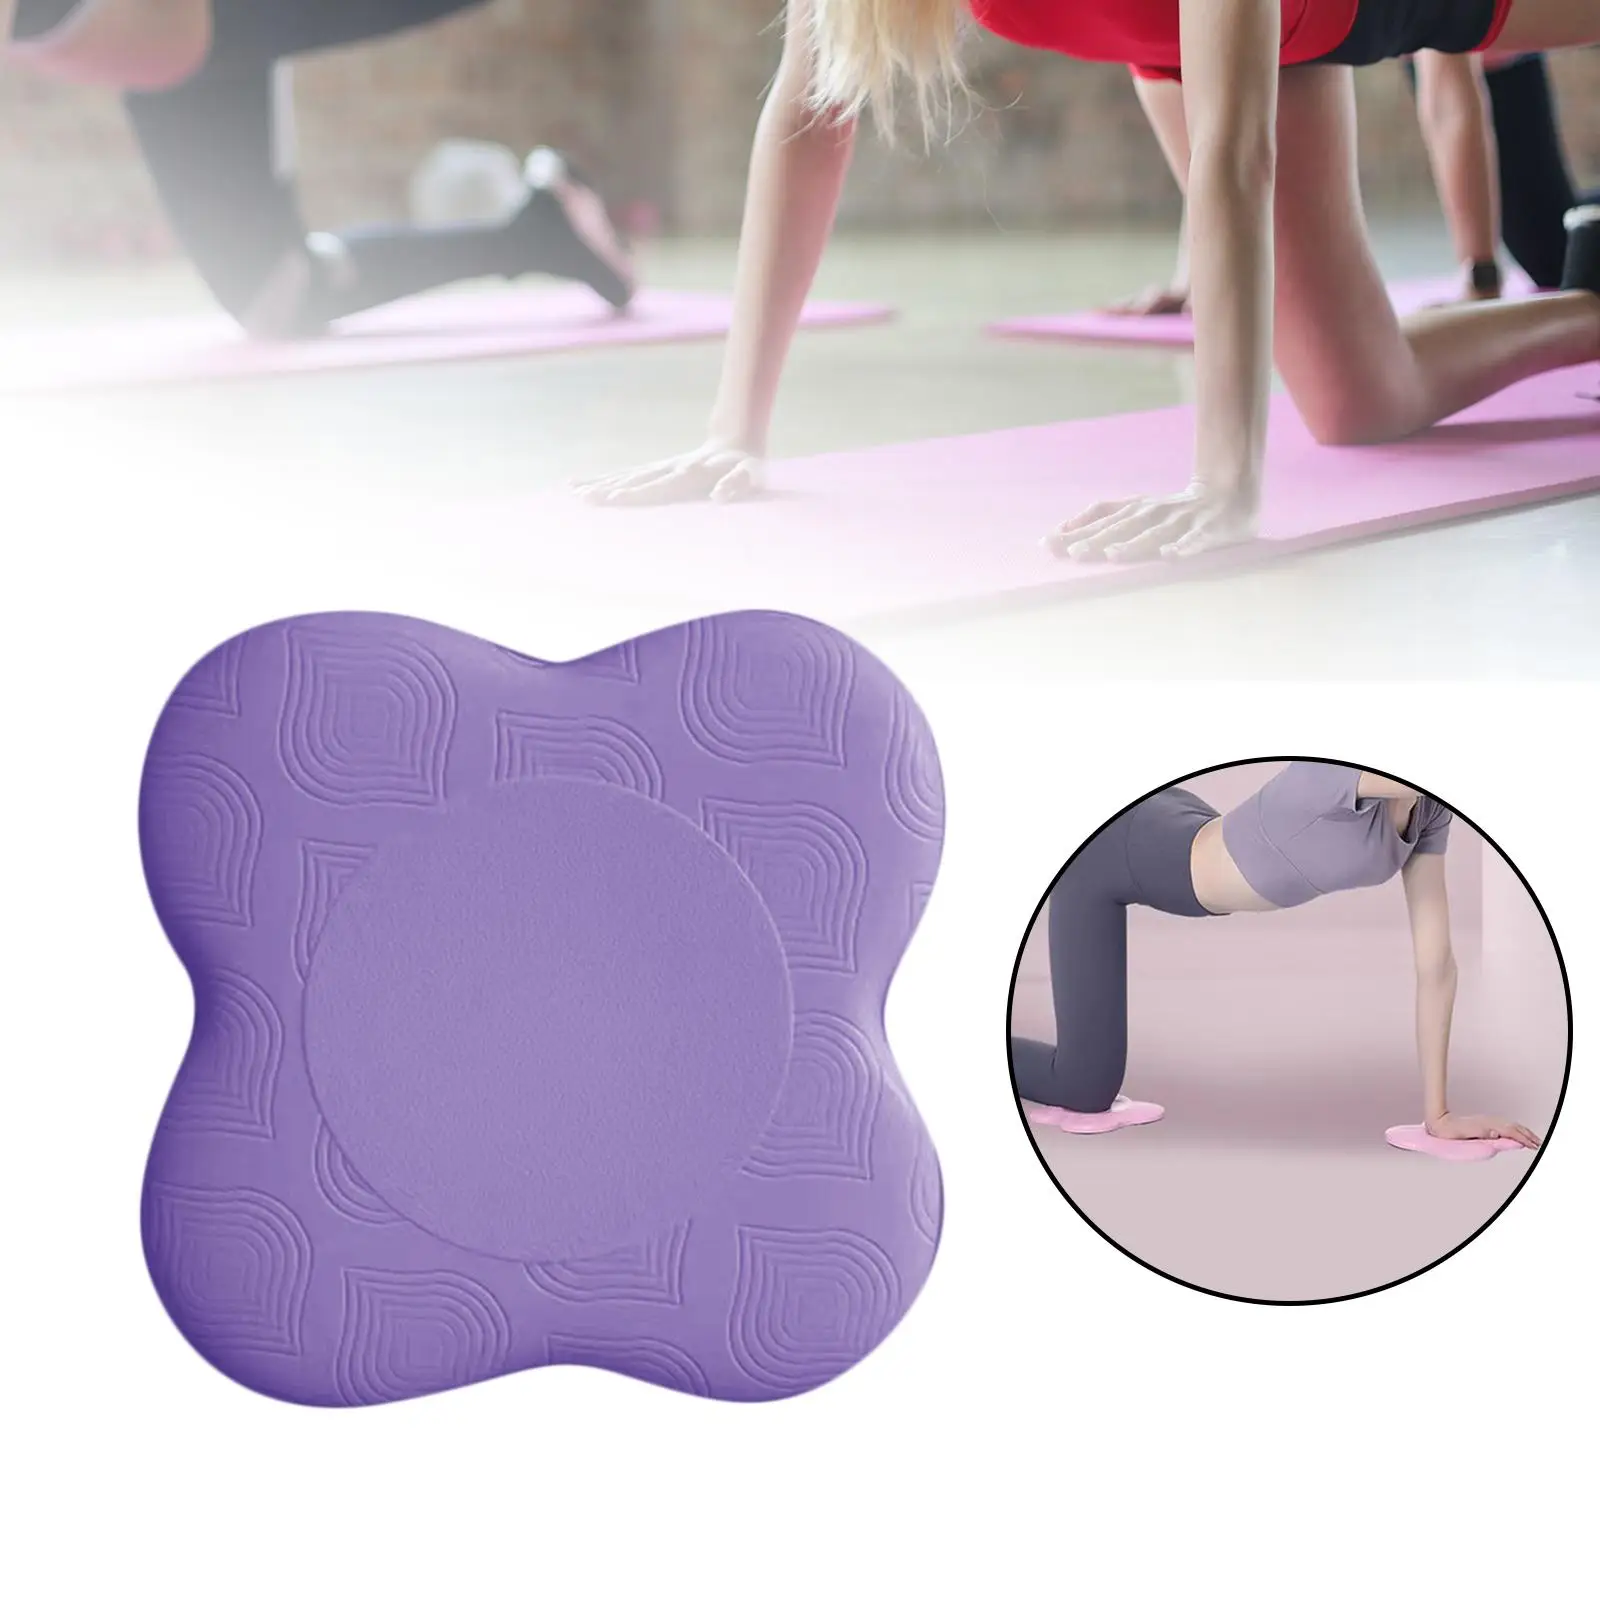 yoga Pad Comfortable Kneeling Support Sport Mat for Exercise Accessories Gardening